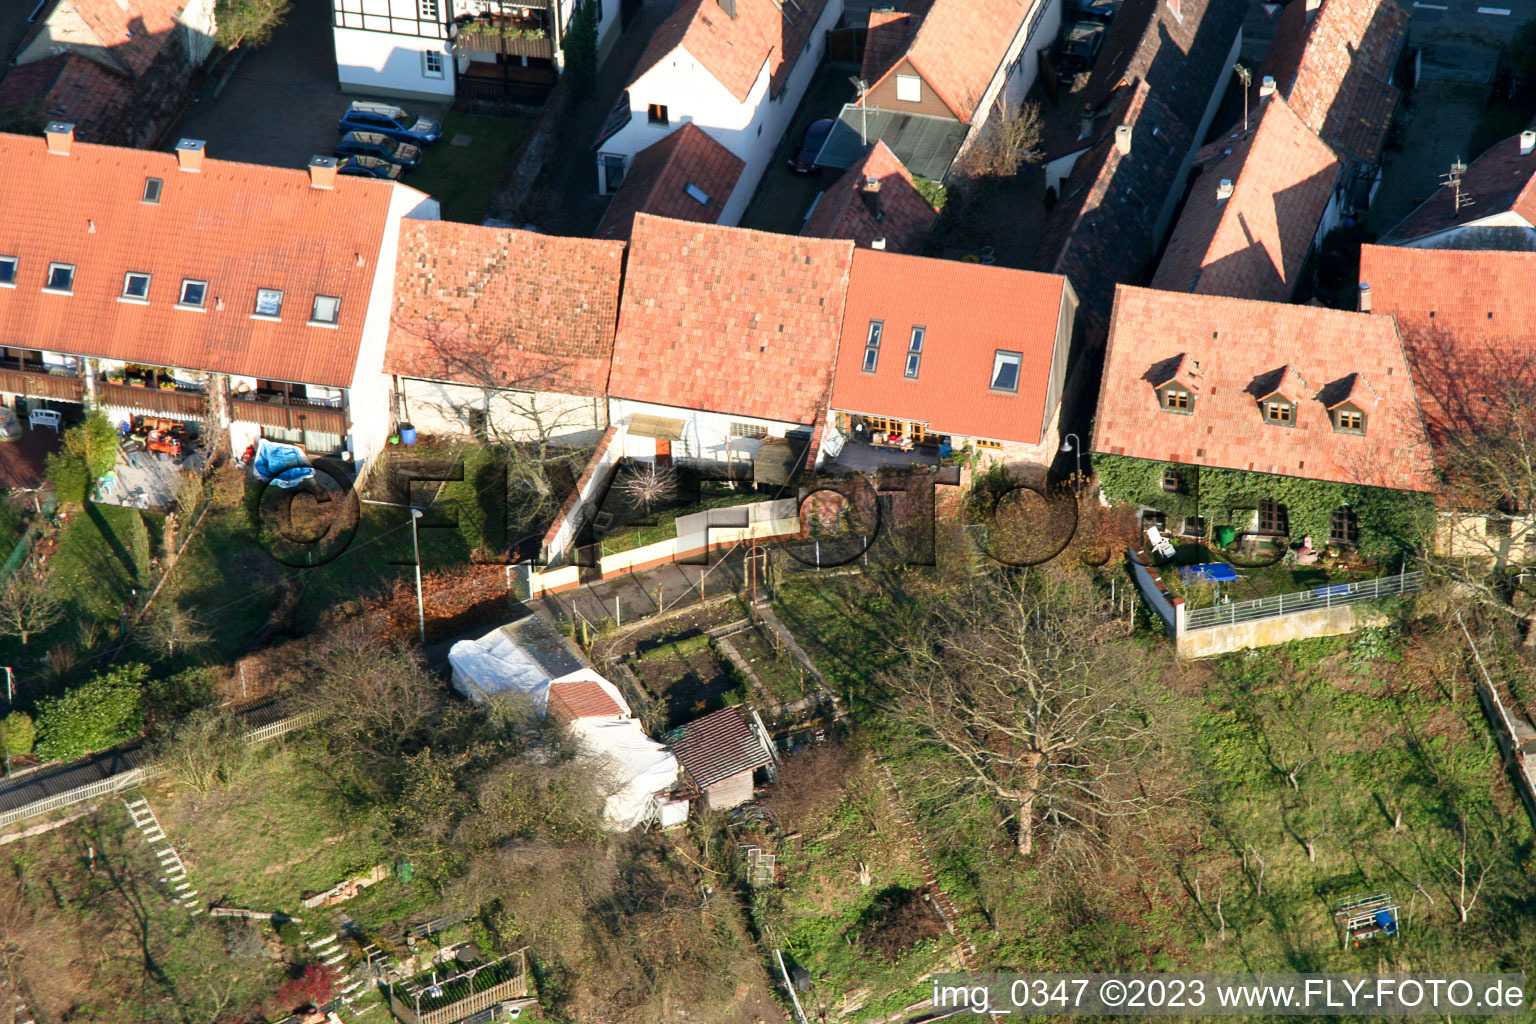 Aerial view of Ludwigstr in Jockgrim in the state Rhineland-Palatinate, Germany